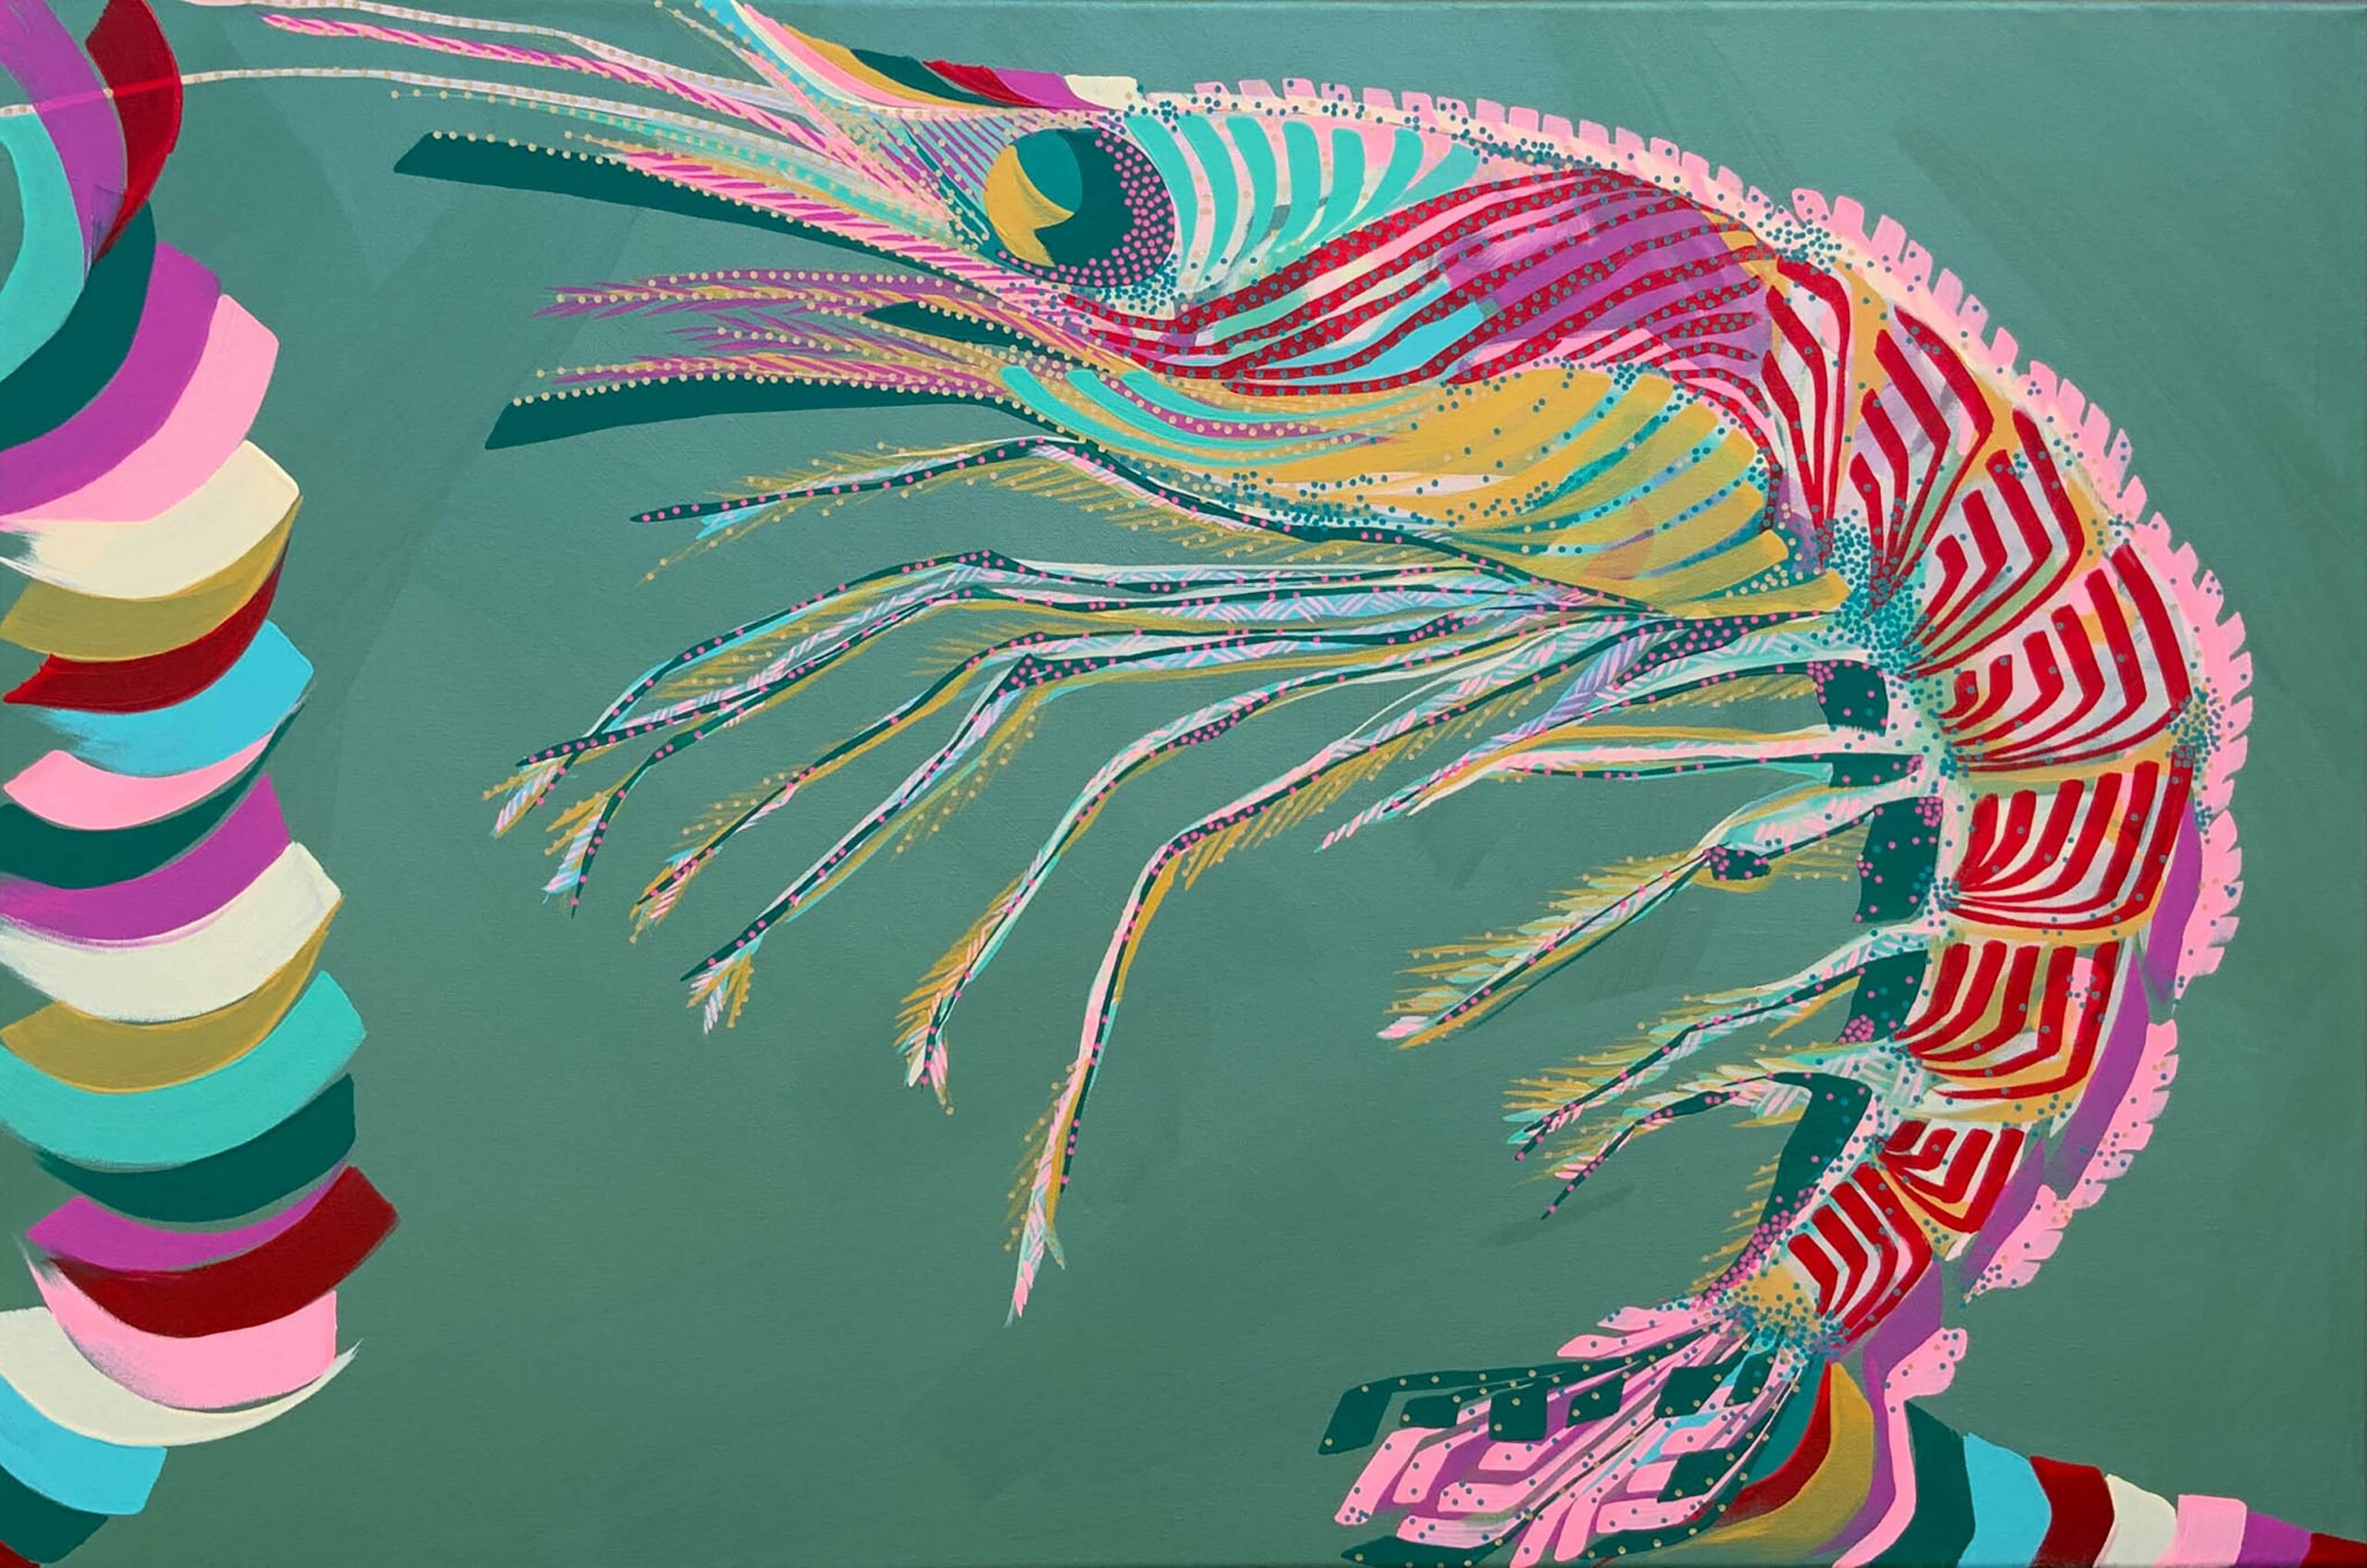 Contemporary take on a shrimp painting.